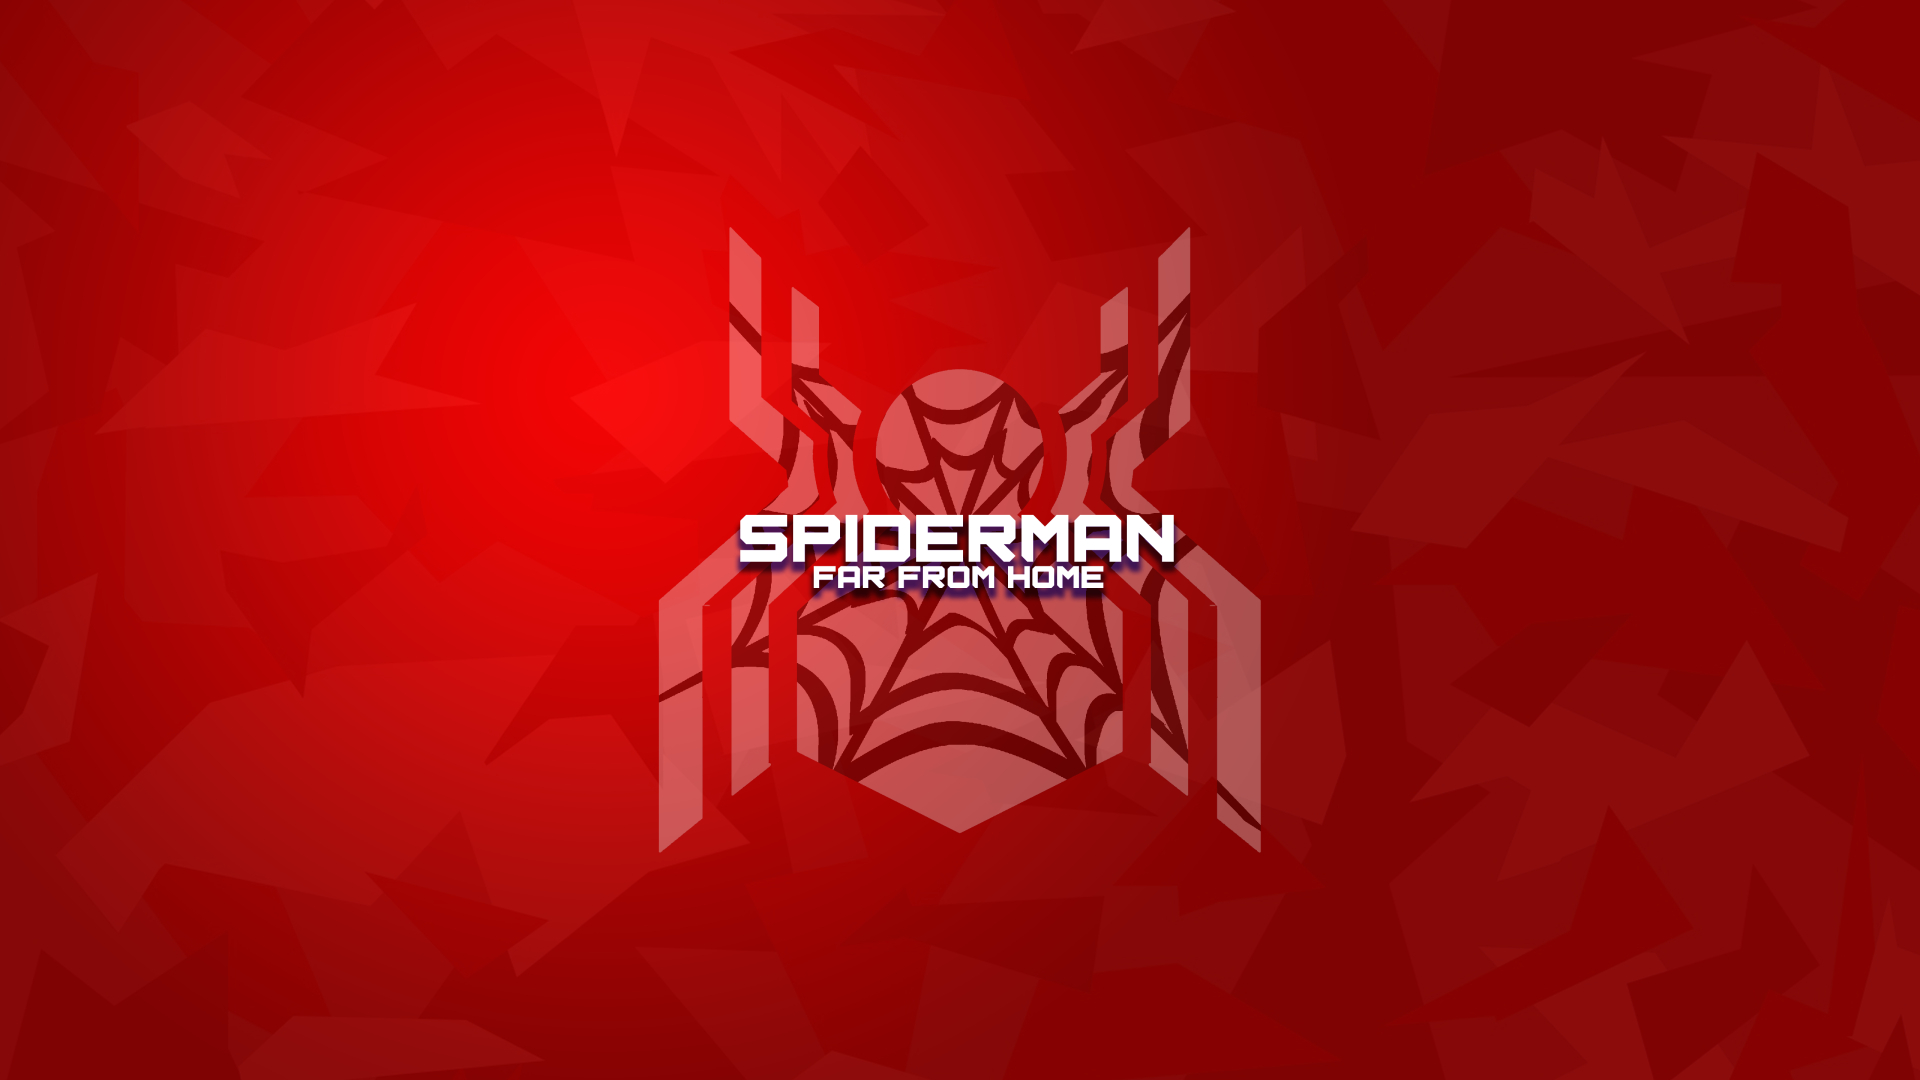 1920x1080 Spider Man Far From Home Low Poly 1080p Laptop Full Hd Images, Photos, Reviews